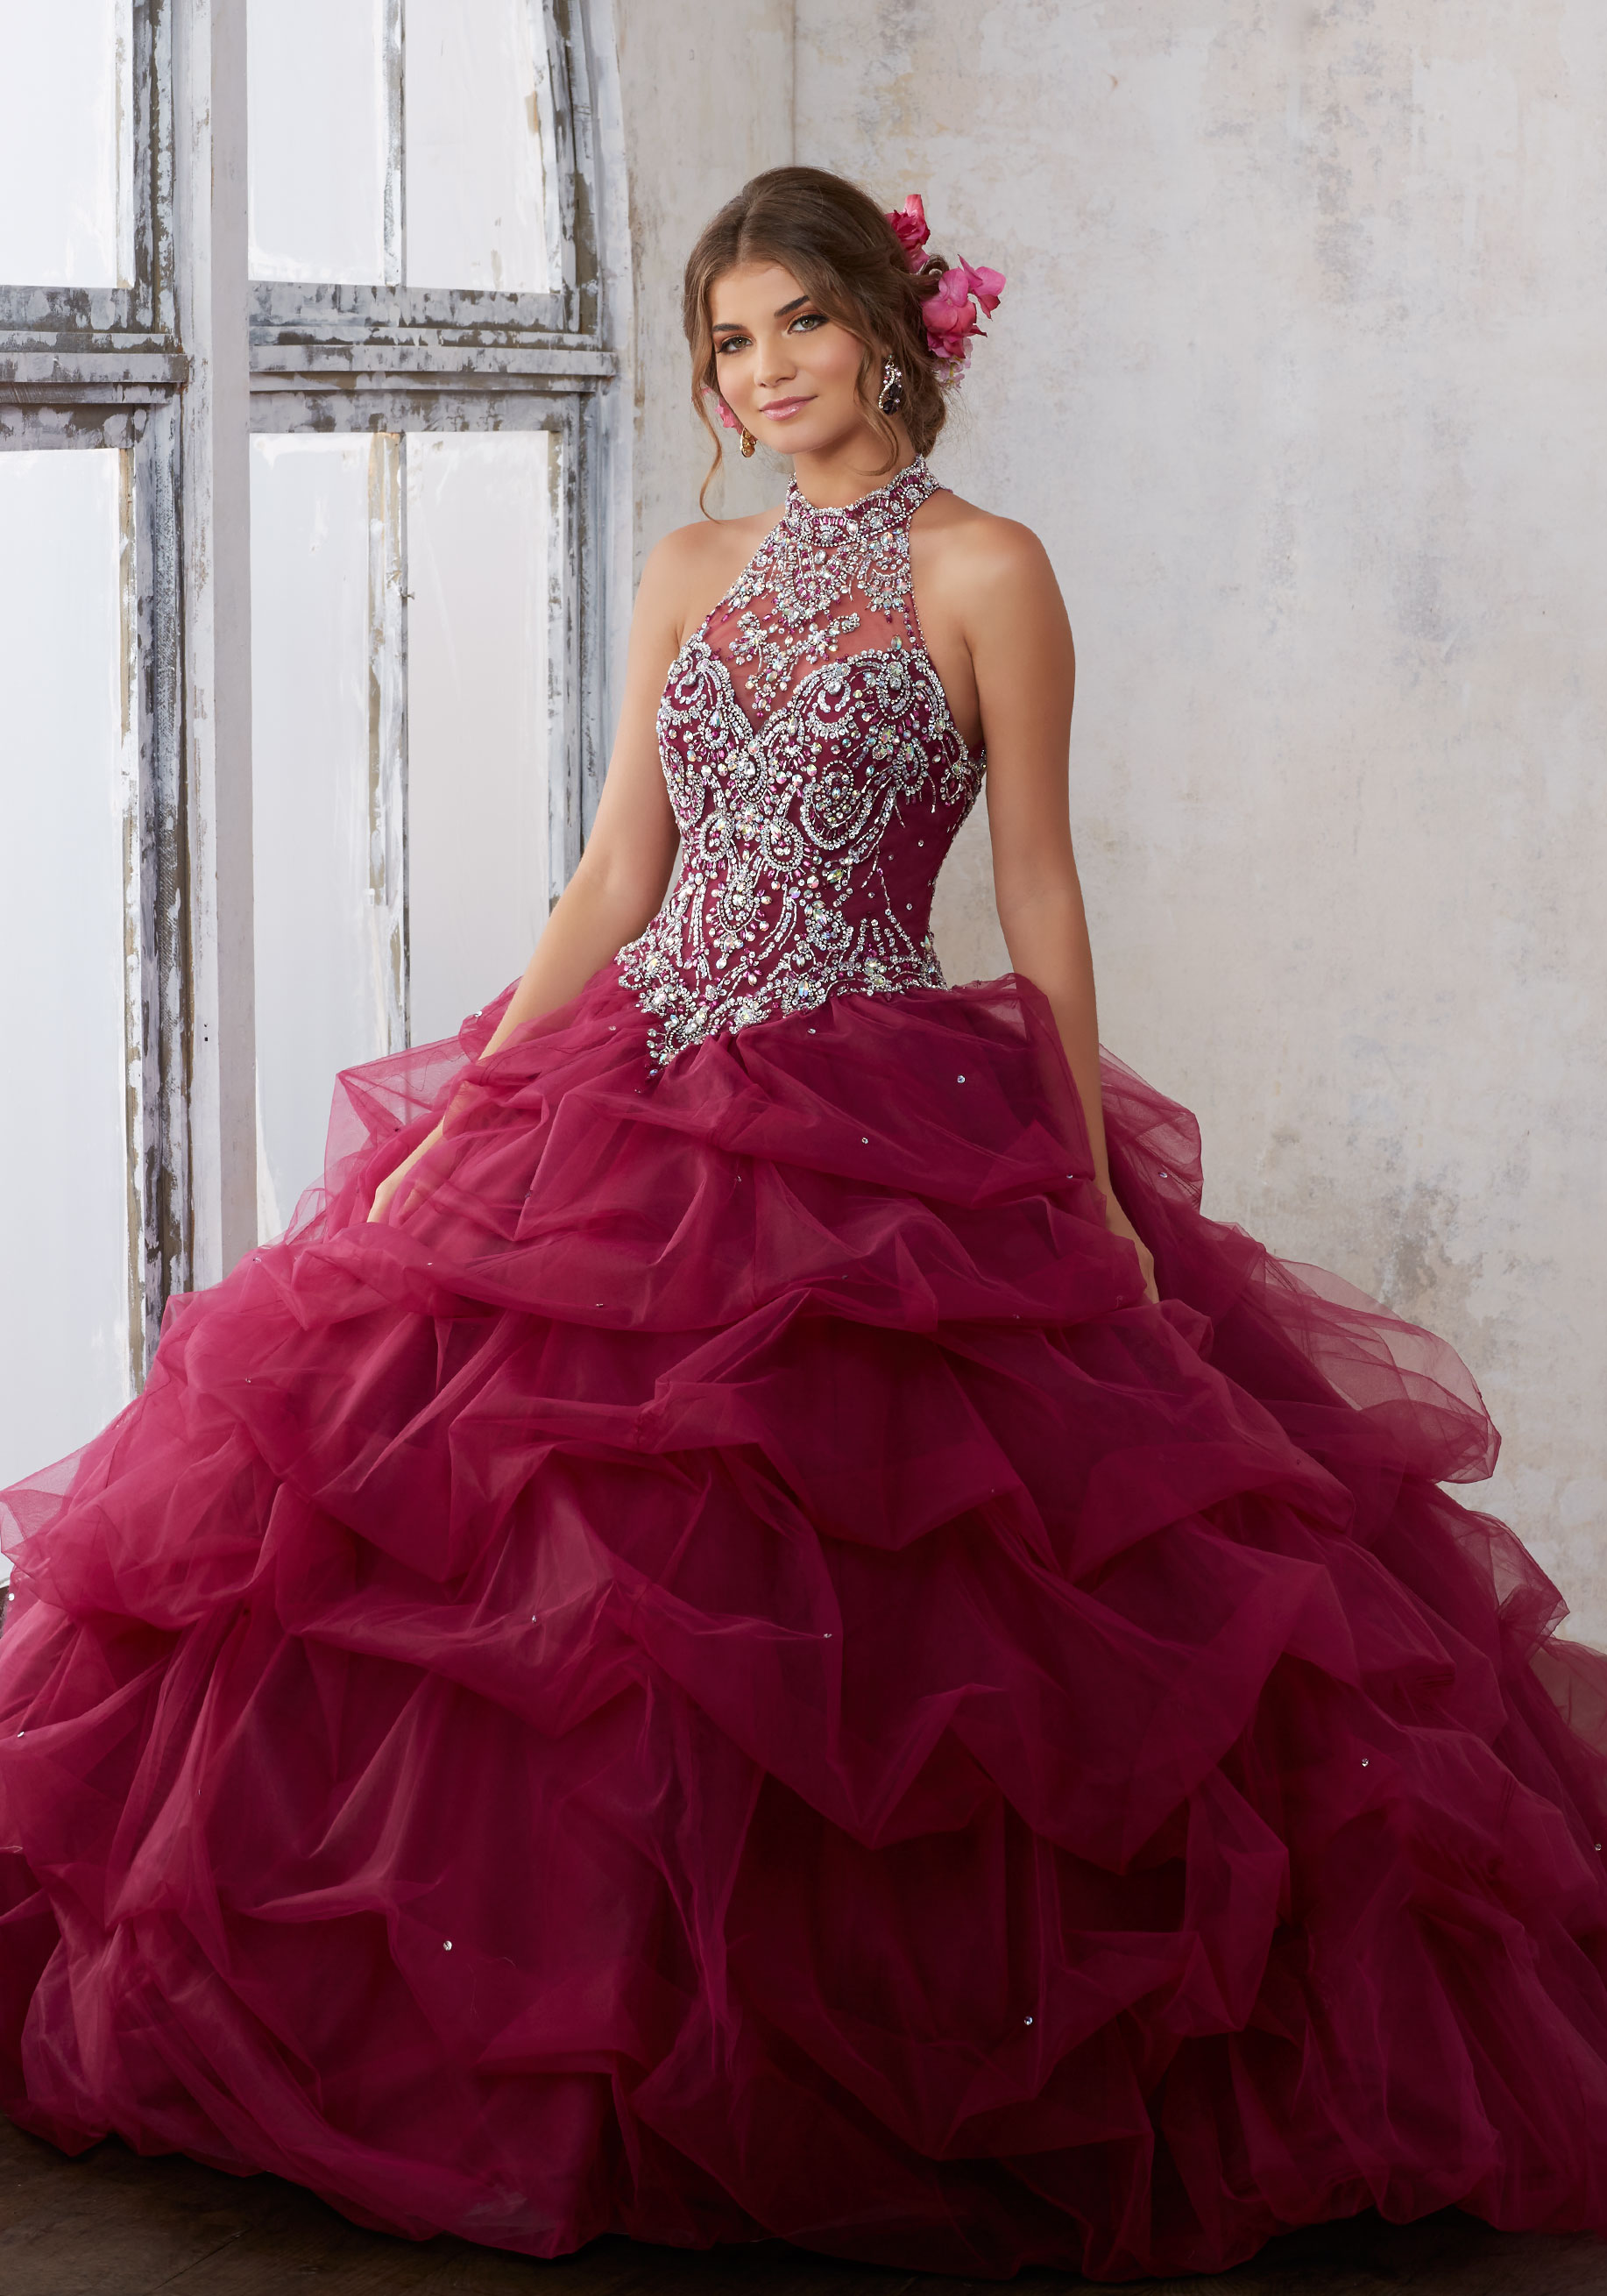 Types of Quinceañera dresses, a woman in a red dress posing for a picture